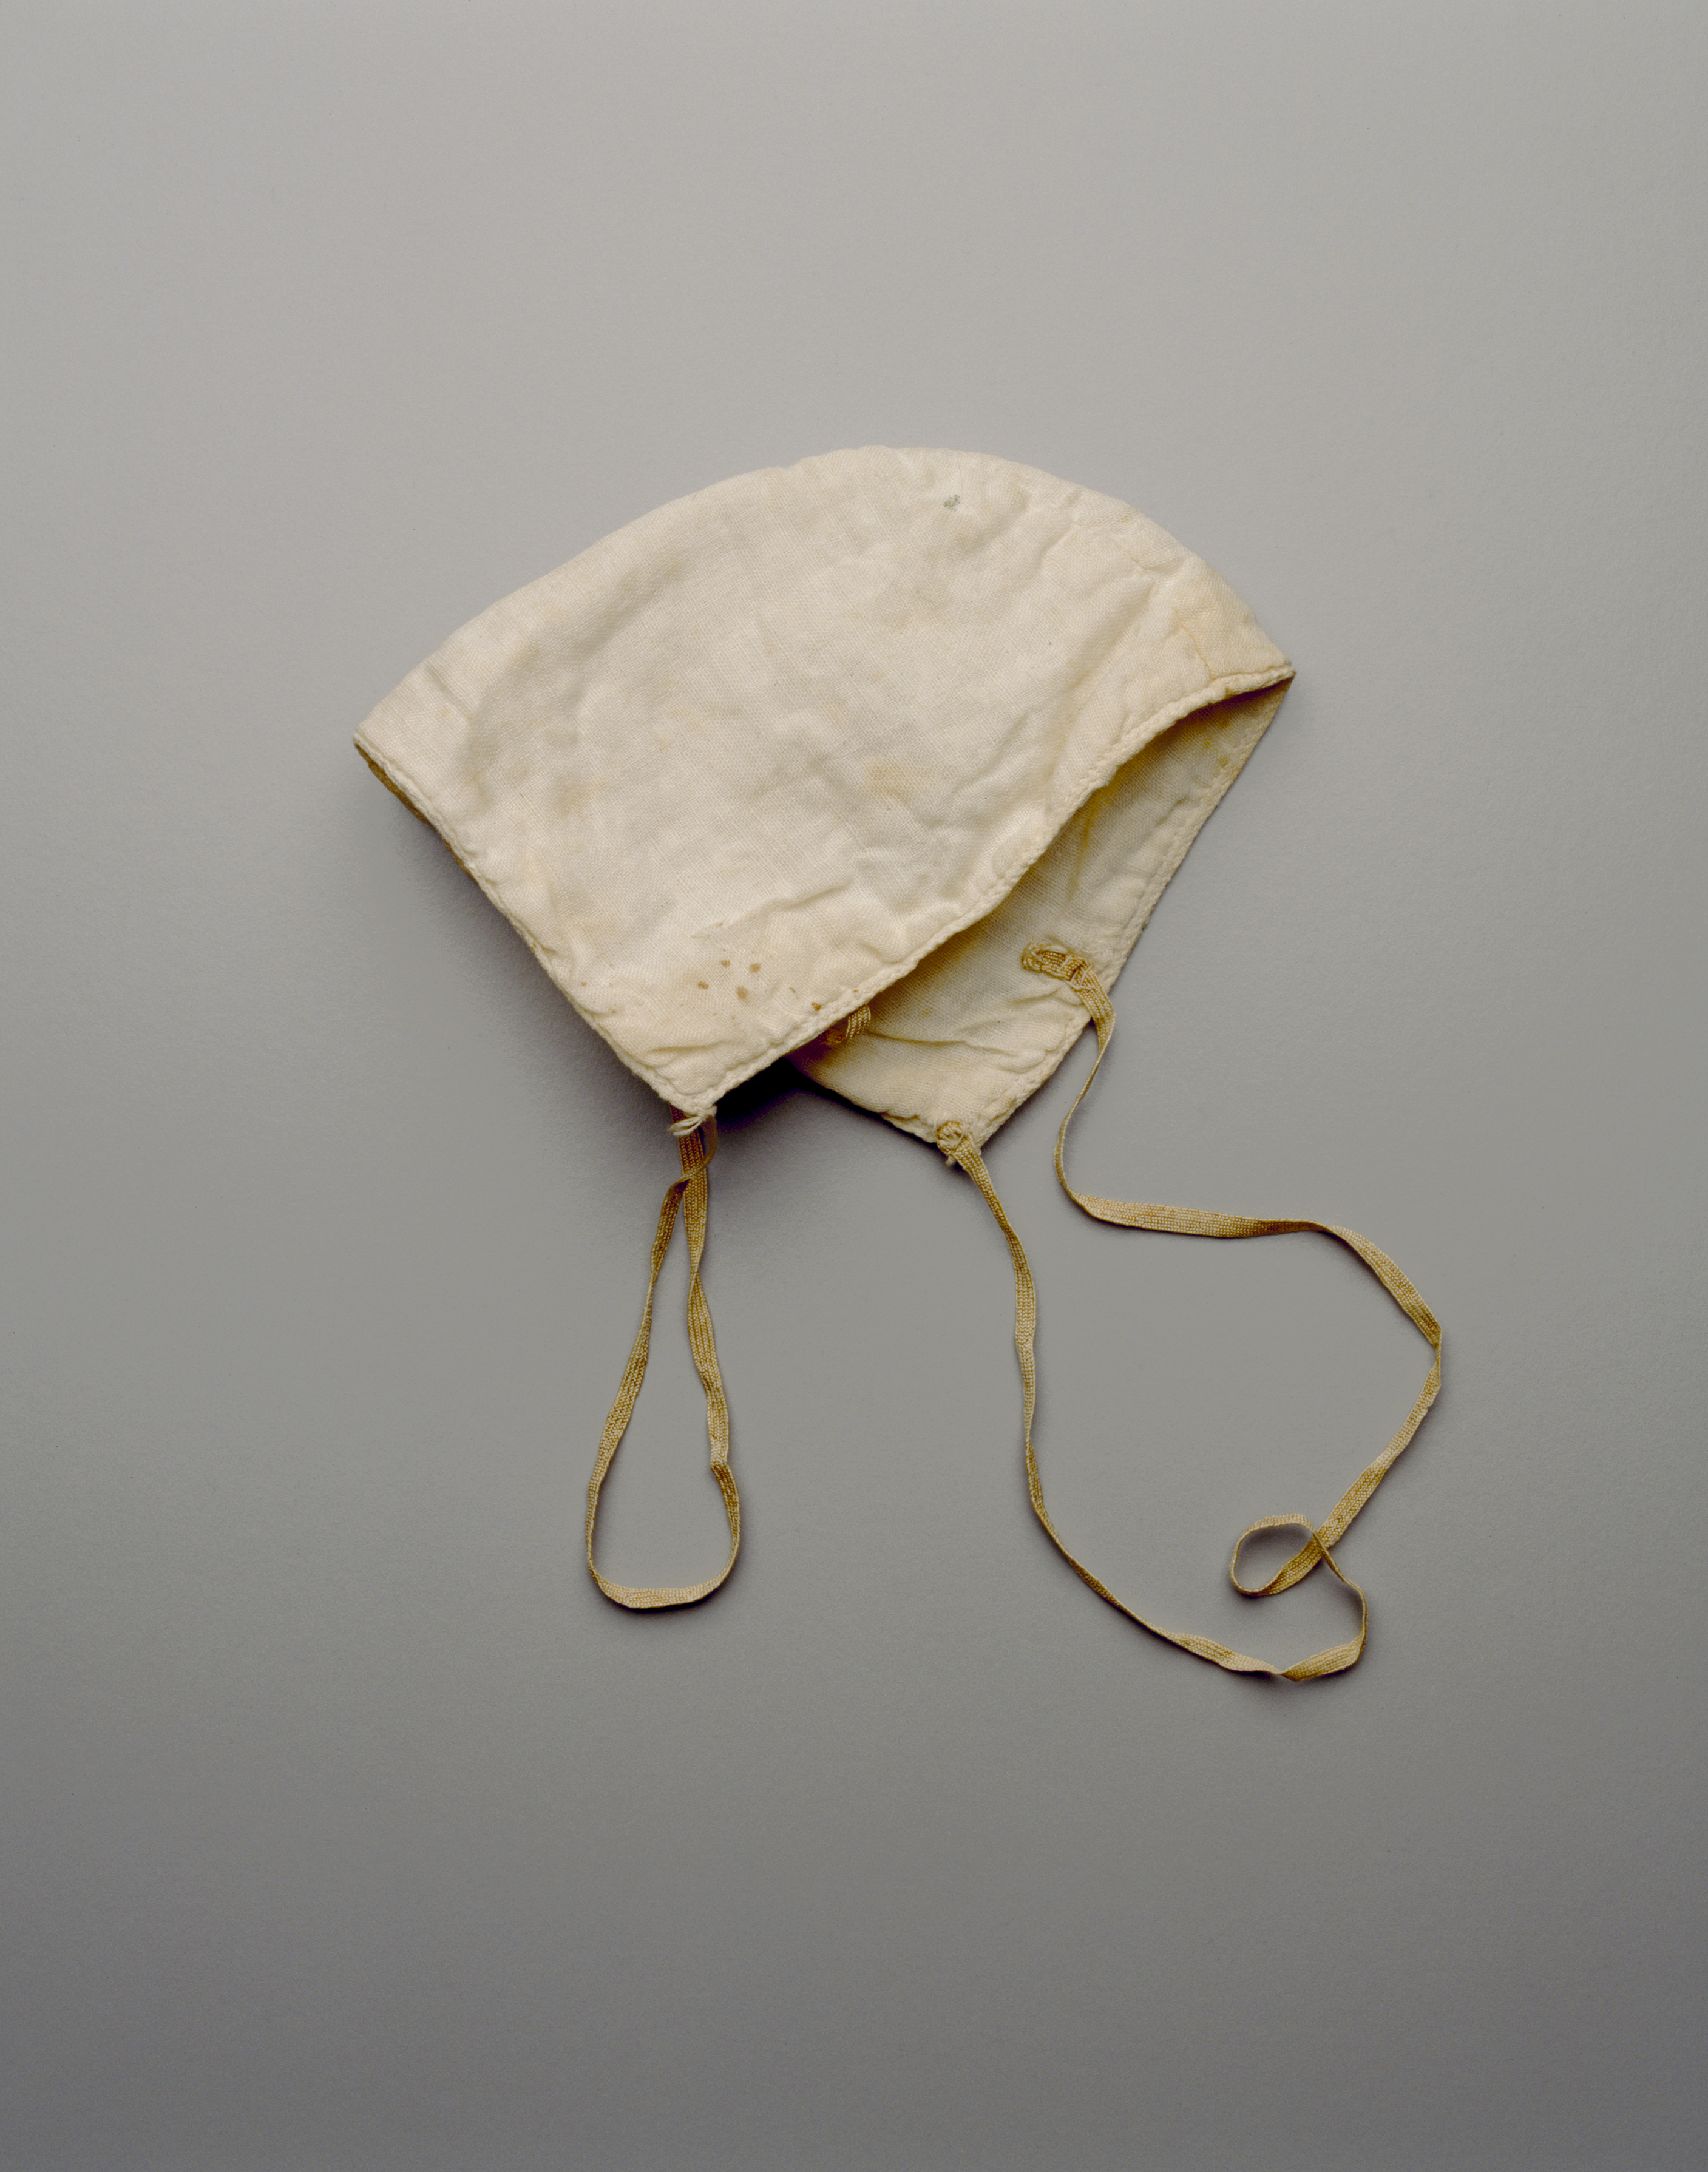 Cotton face mask made from two triangular halves attached at a central curved seam. The mask is discolored with age and has stretched elastic loops.